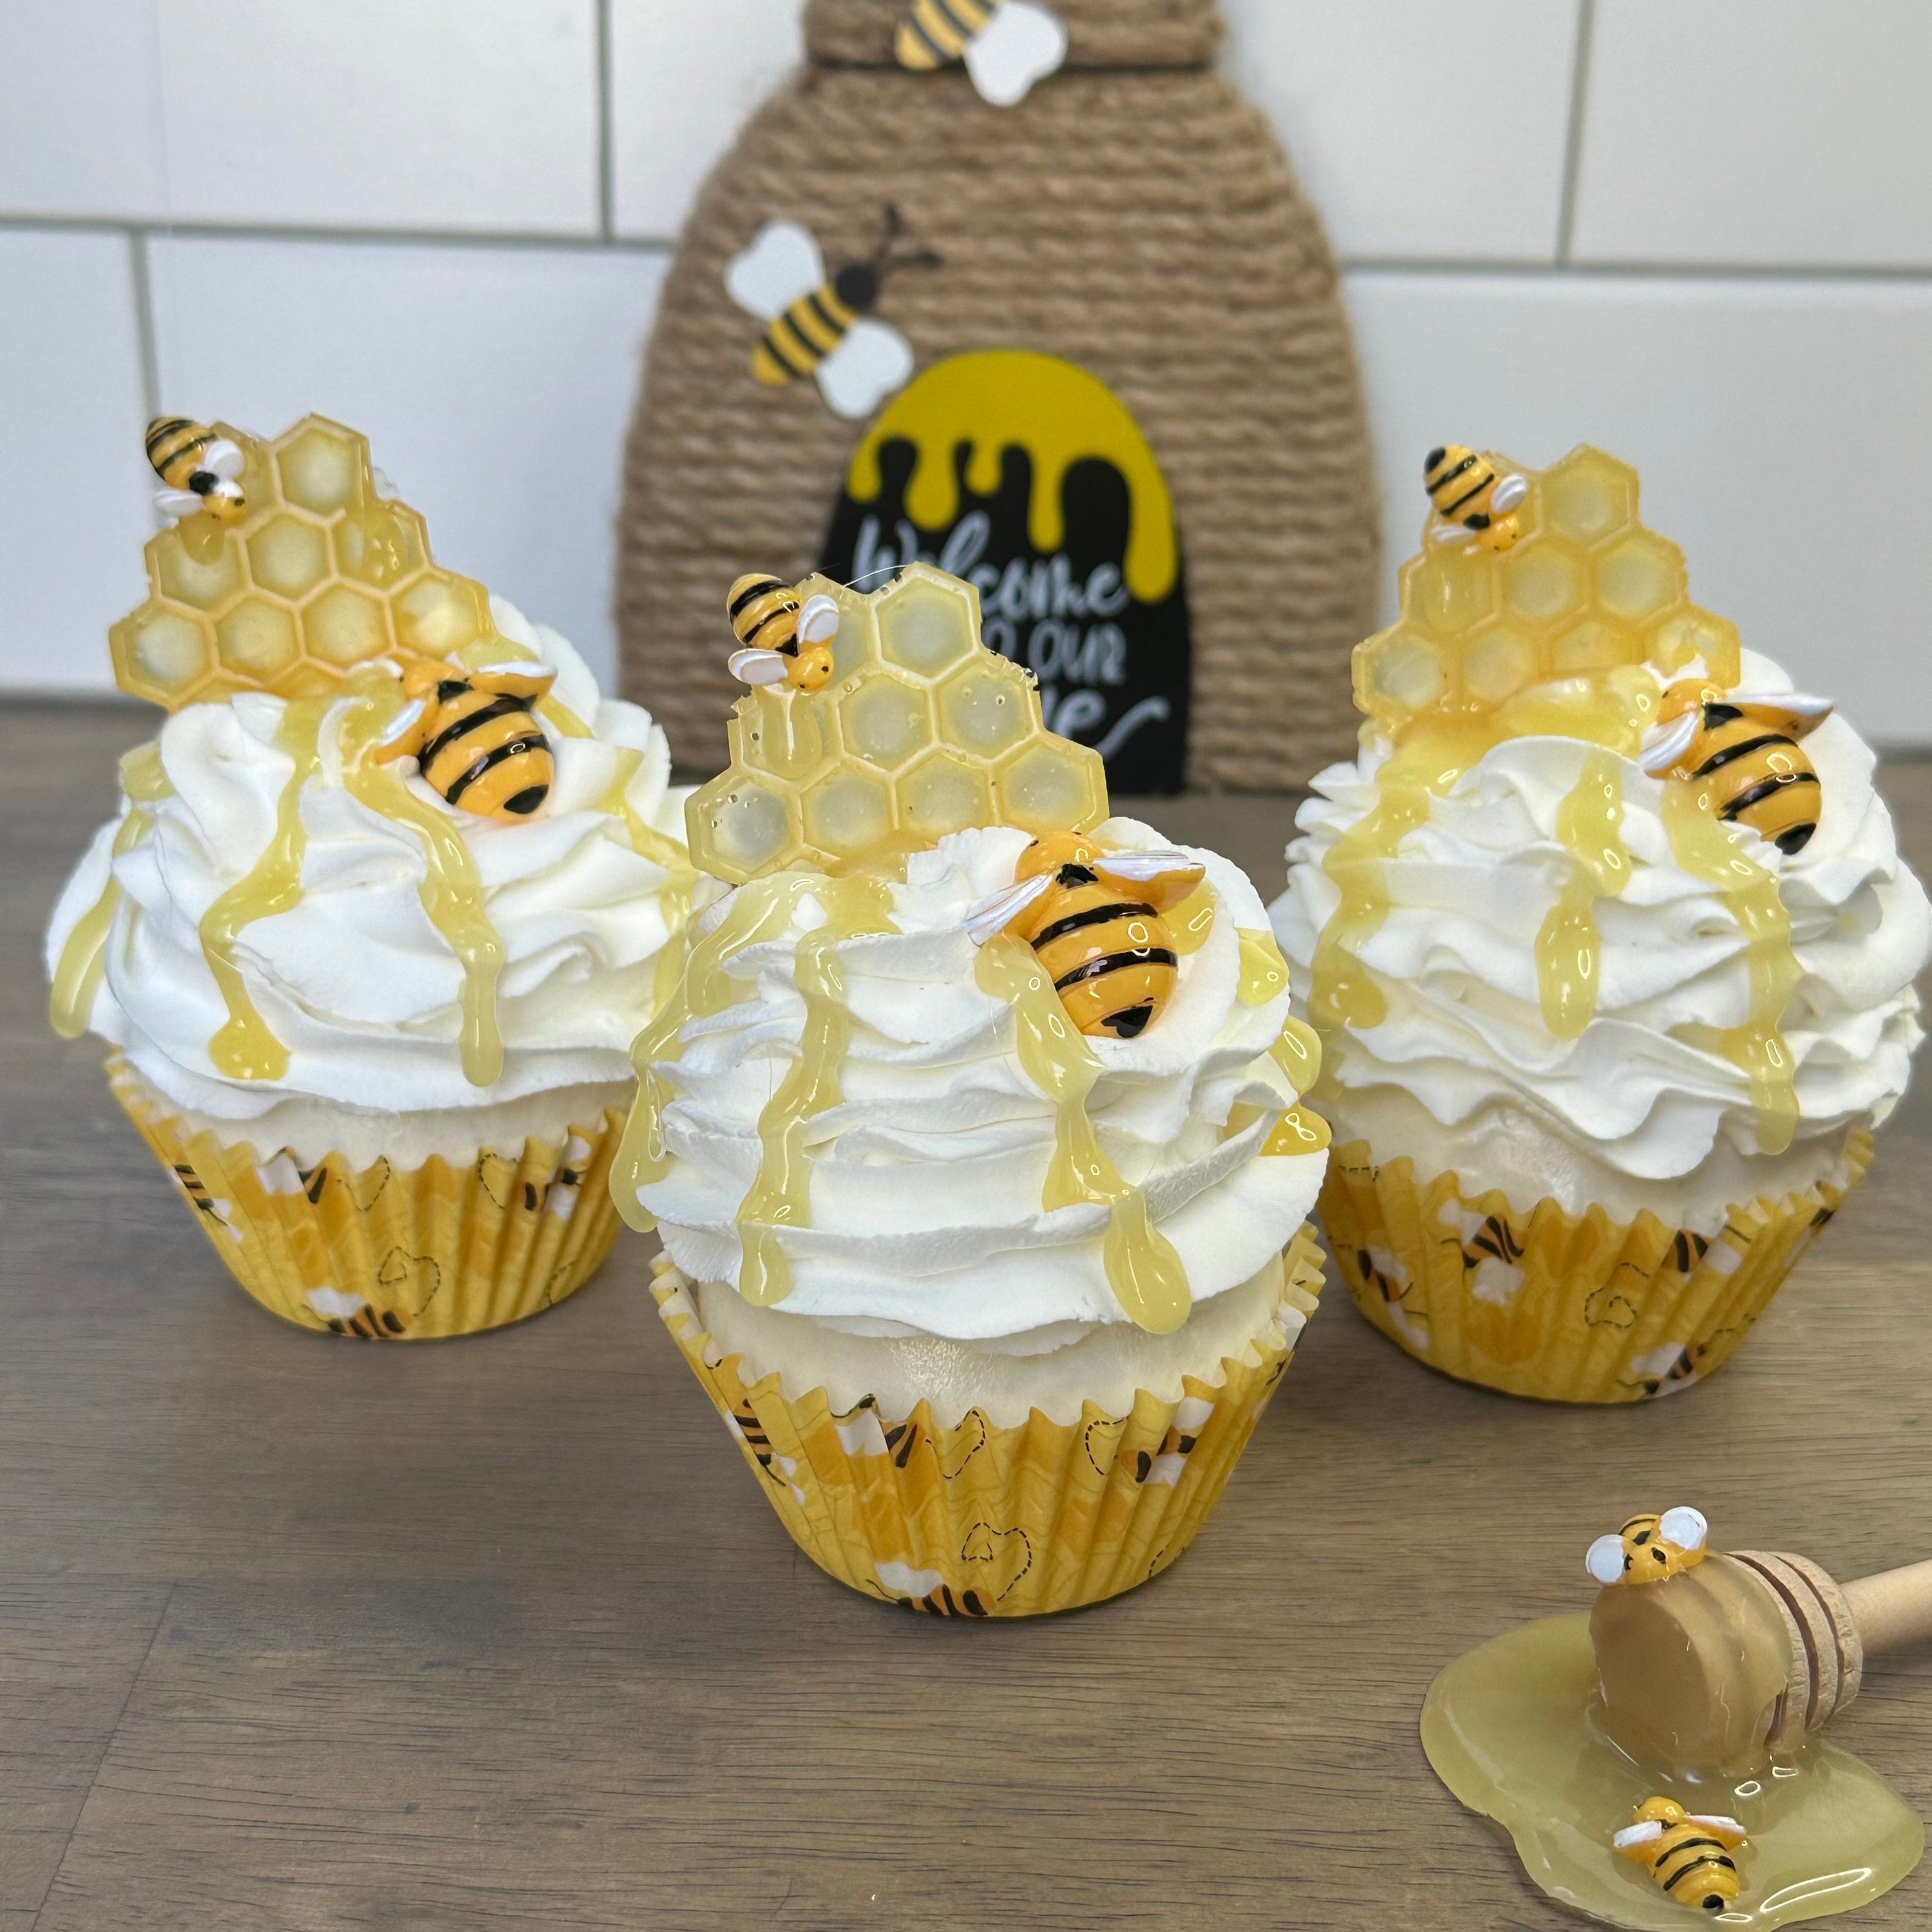 15 HONEY BEES EDIBLE Sugar Cupcake or Cake Toppers Bee Decorations for Party  Desserts, Birthdays, Spring Themed Party 